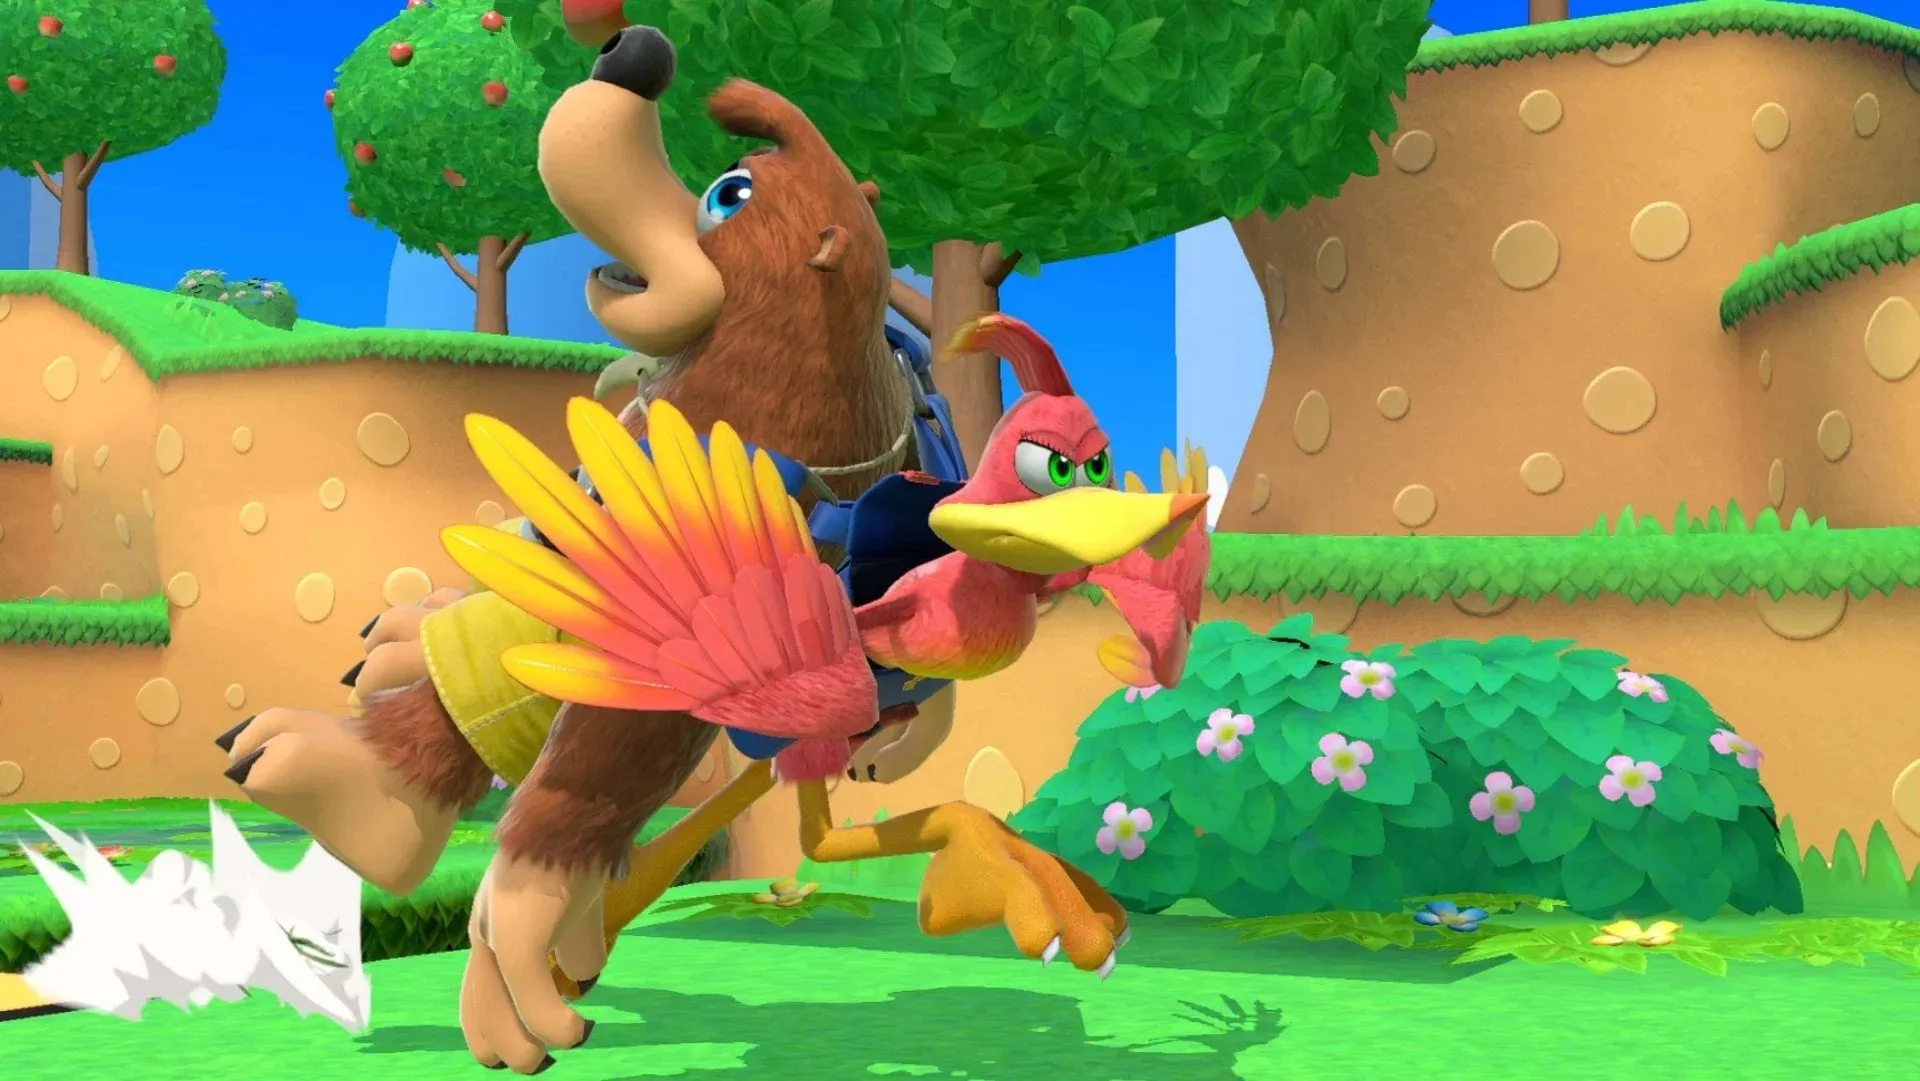 Former Playtonic Writer Confirms Banjo And Kazooie Were Almost In